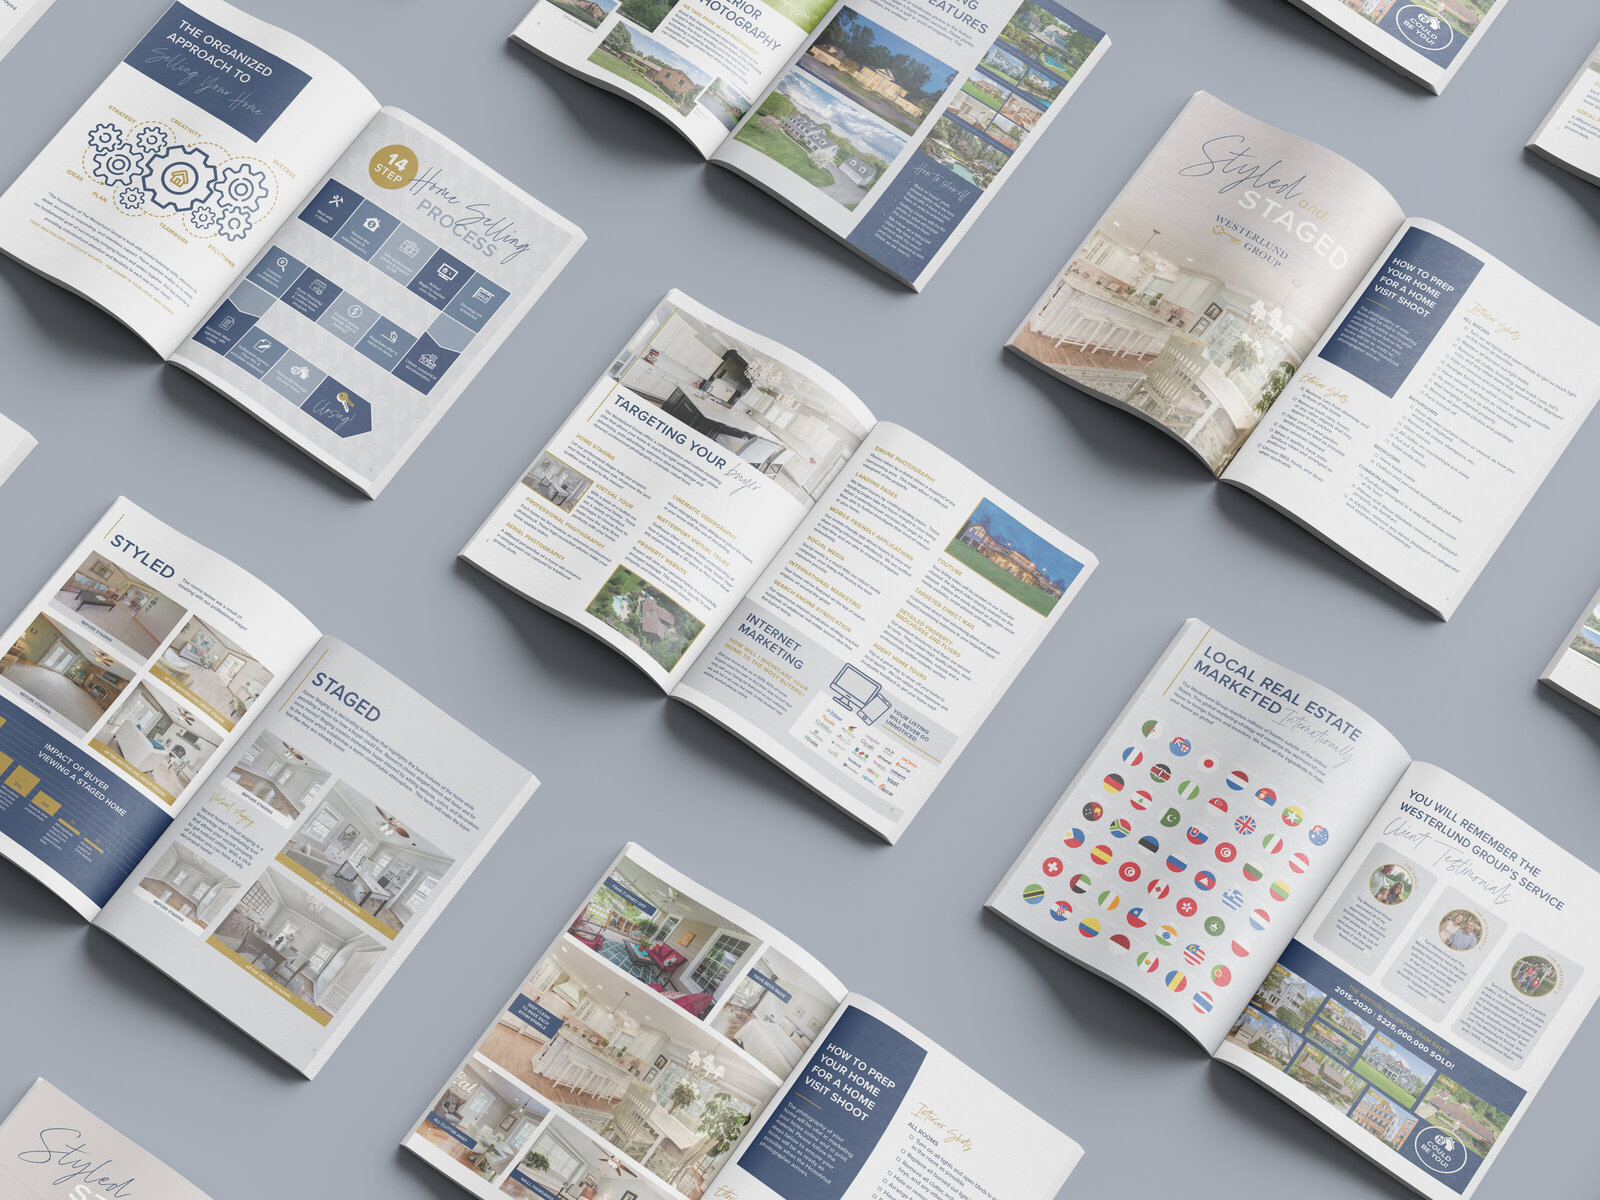 A collage of real estate workbooks